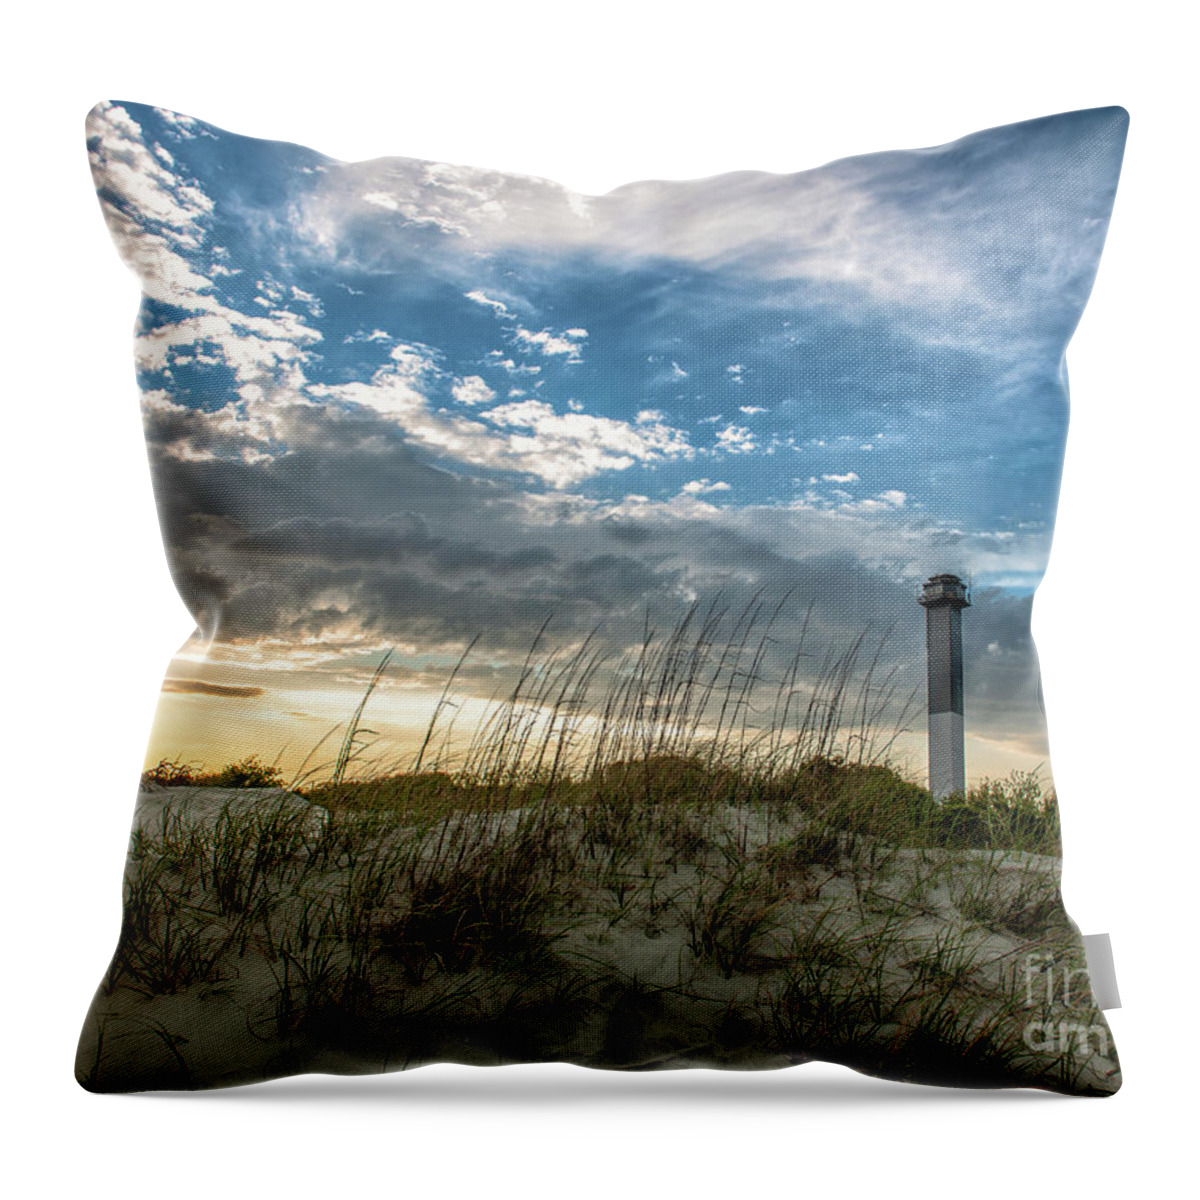 Sullivan's Island Lighthouse Throw Pillow featuring the photograph Sullivan's Island Lighthouse Total Contrast by Dale Powell